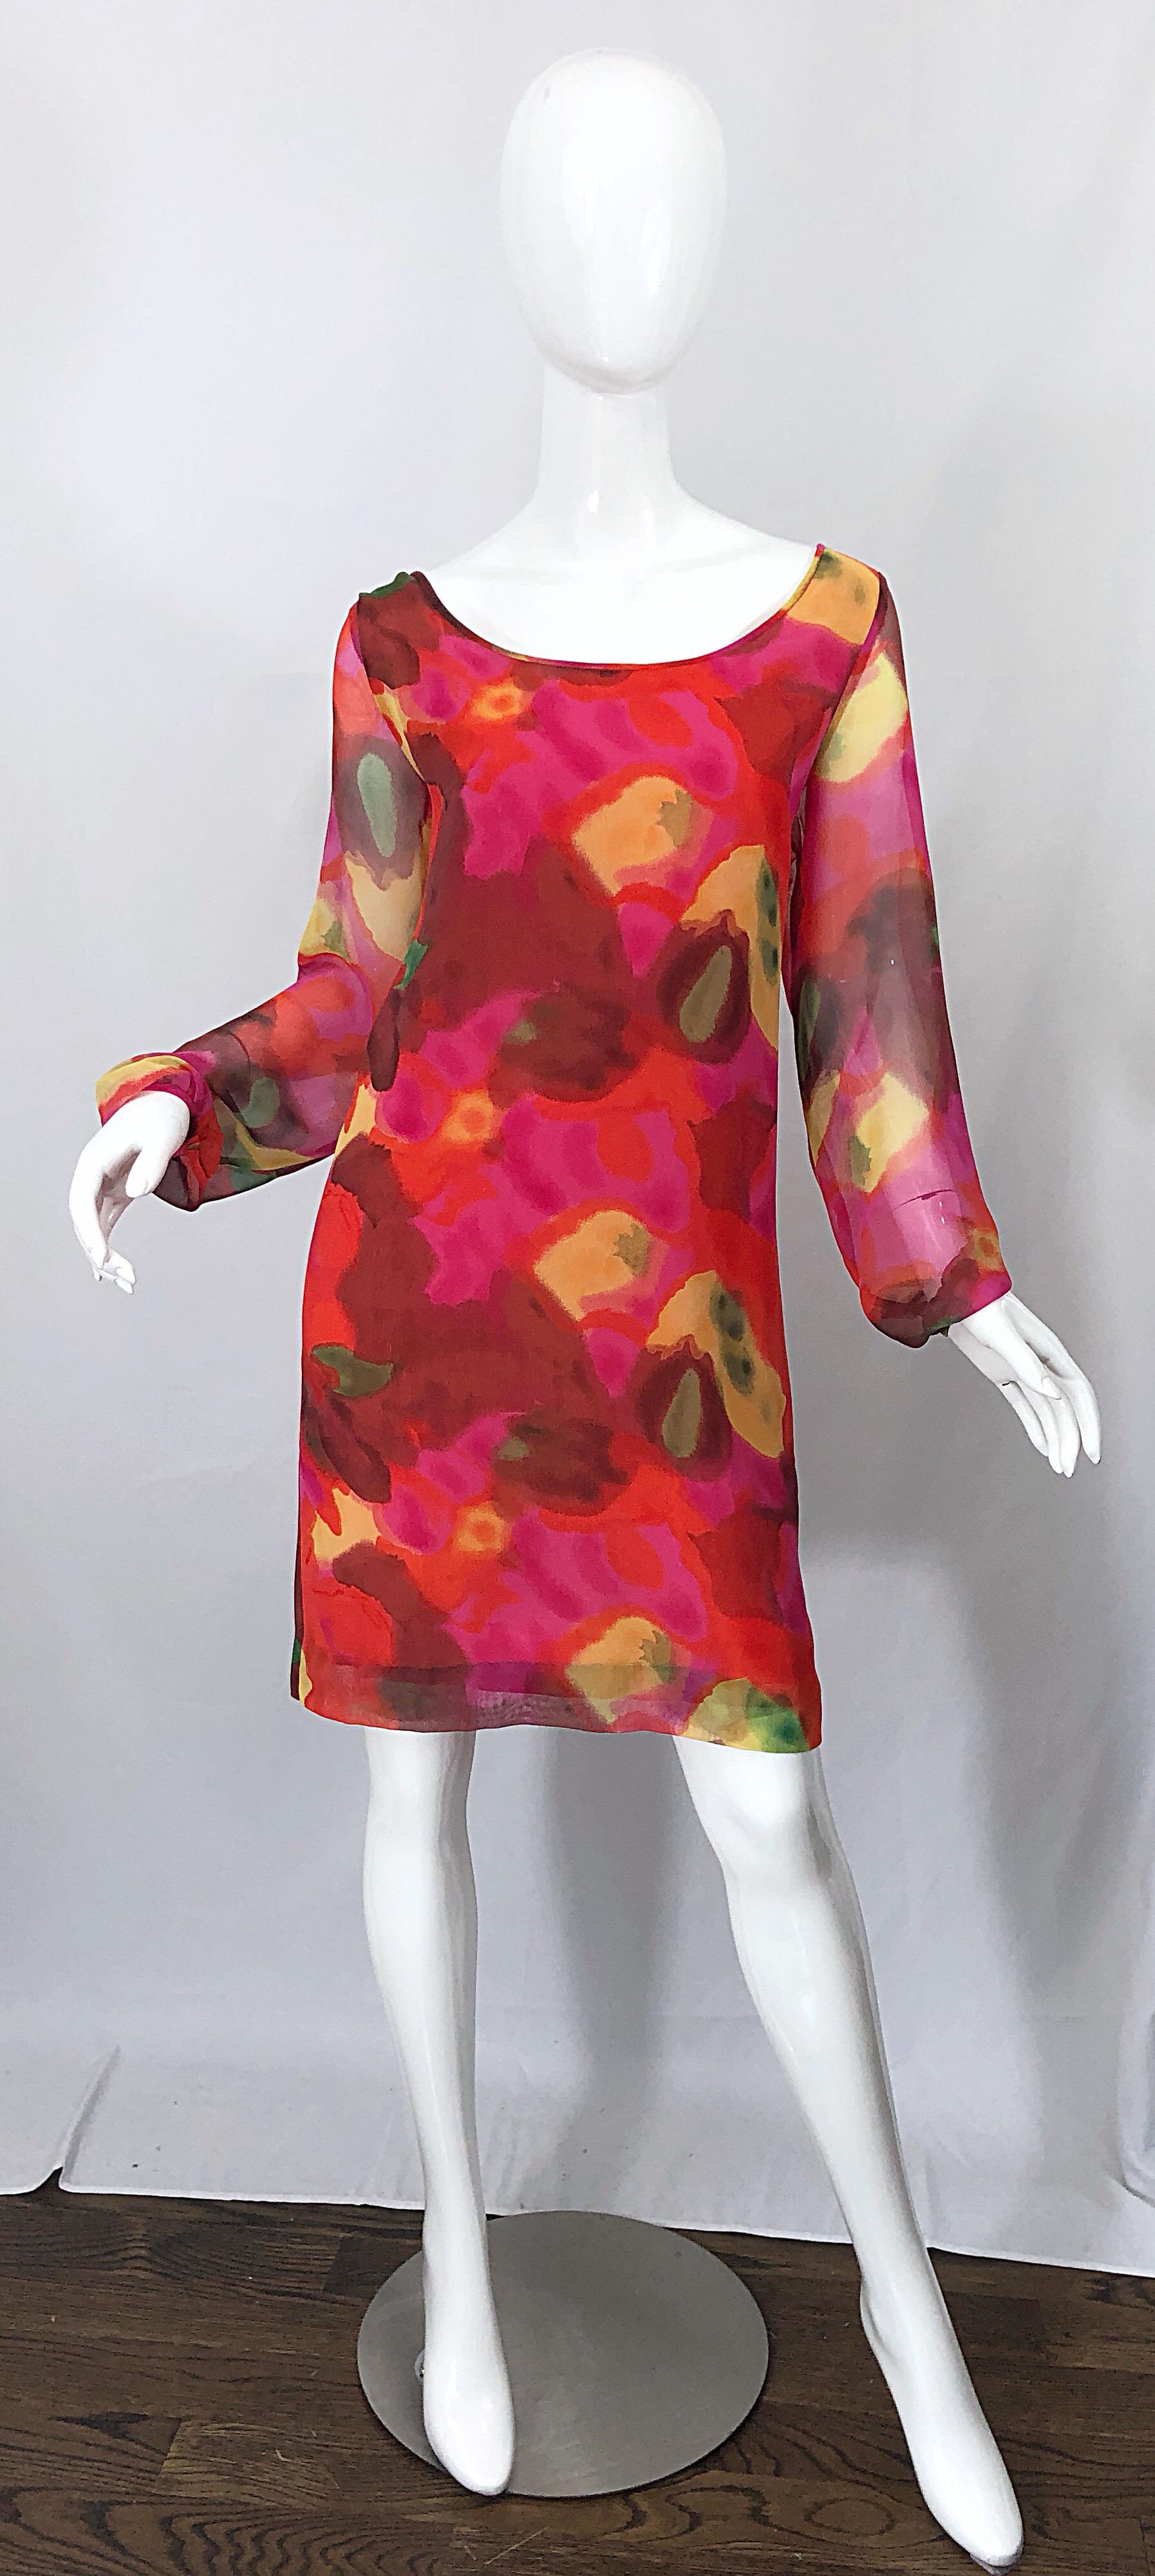 Chic vintage ELIZABETH ARDEN hot pink silk chiffon 60s style dress! Features a hot pink chiffon with watercolor prints in vivid orange, pink, yellow, and green throughout. Dress is fully lined, with semi sheer chiffon sleeves in same print. Silk